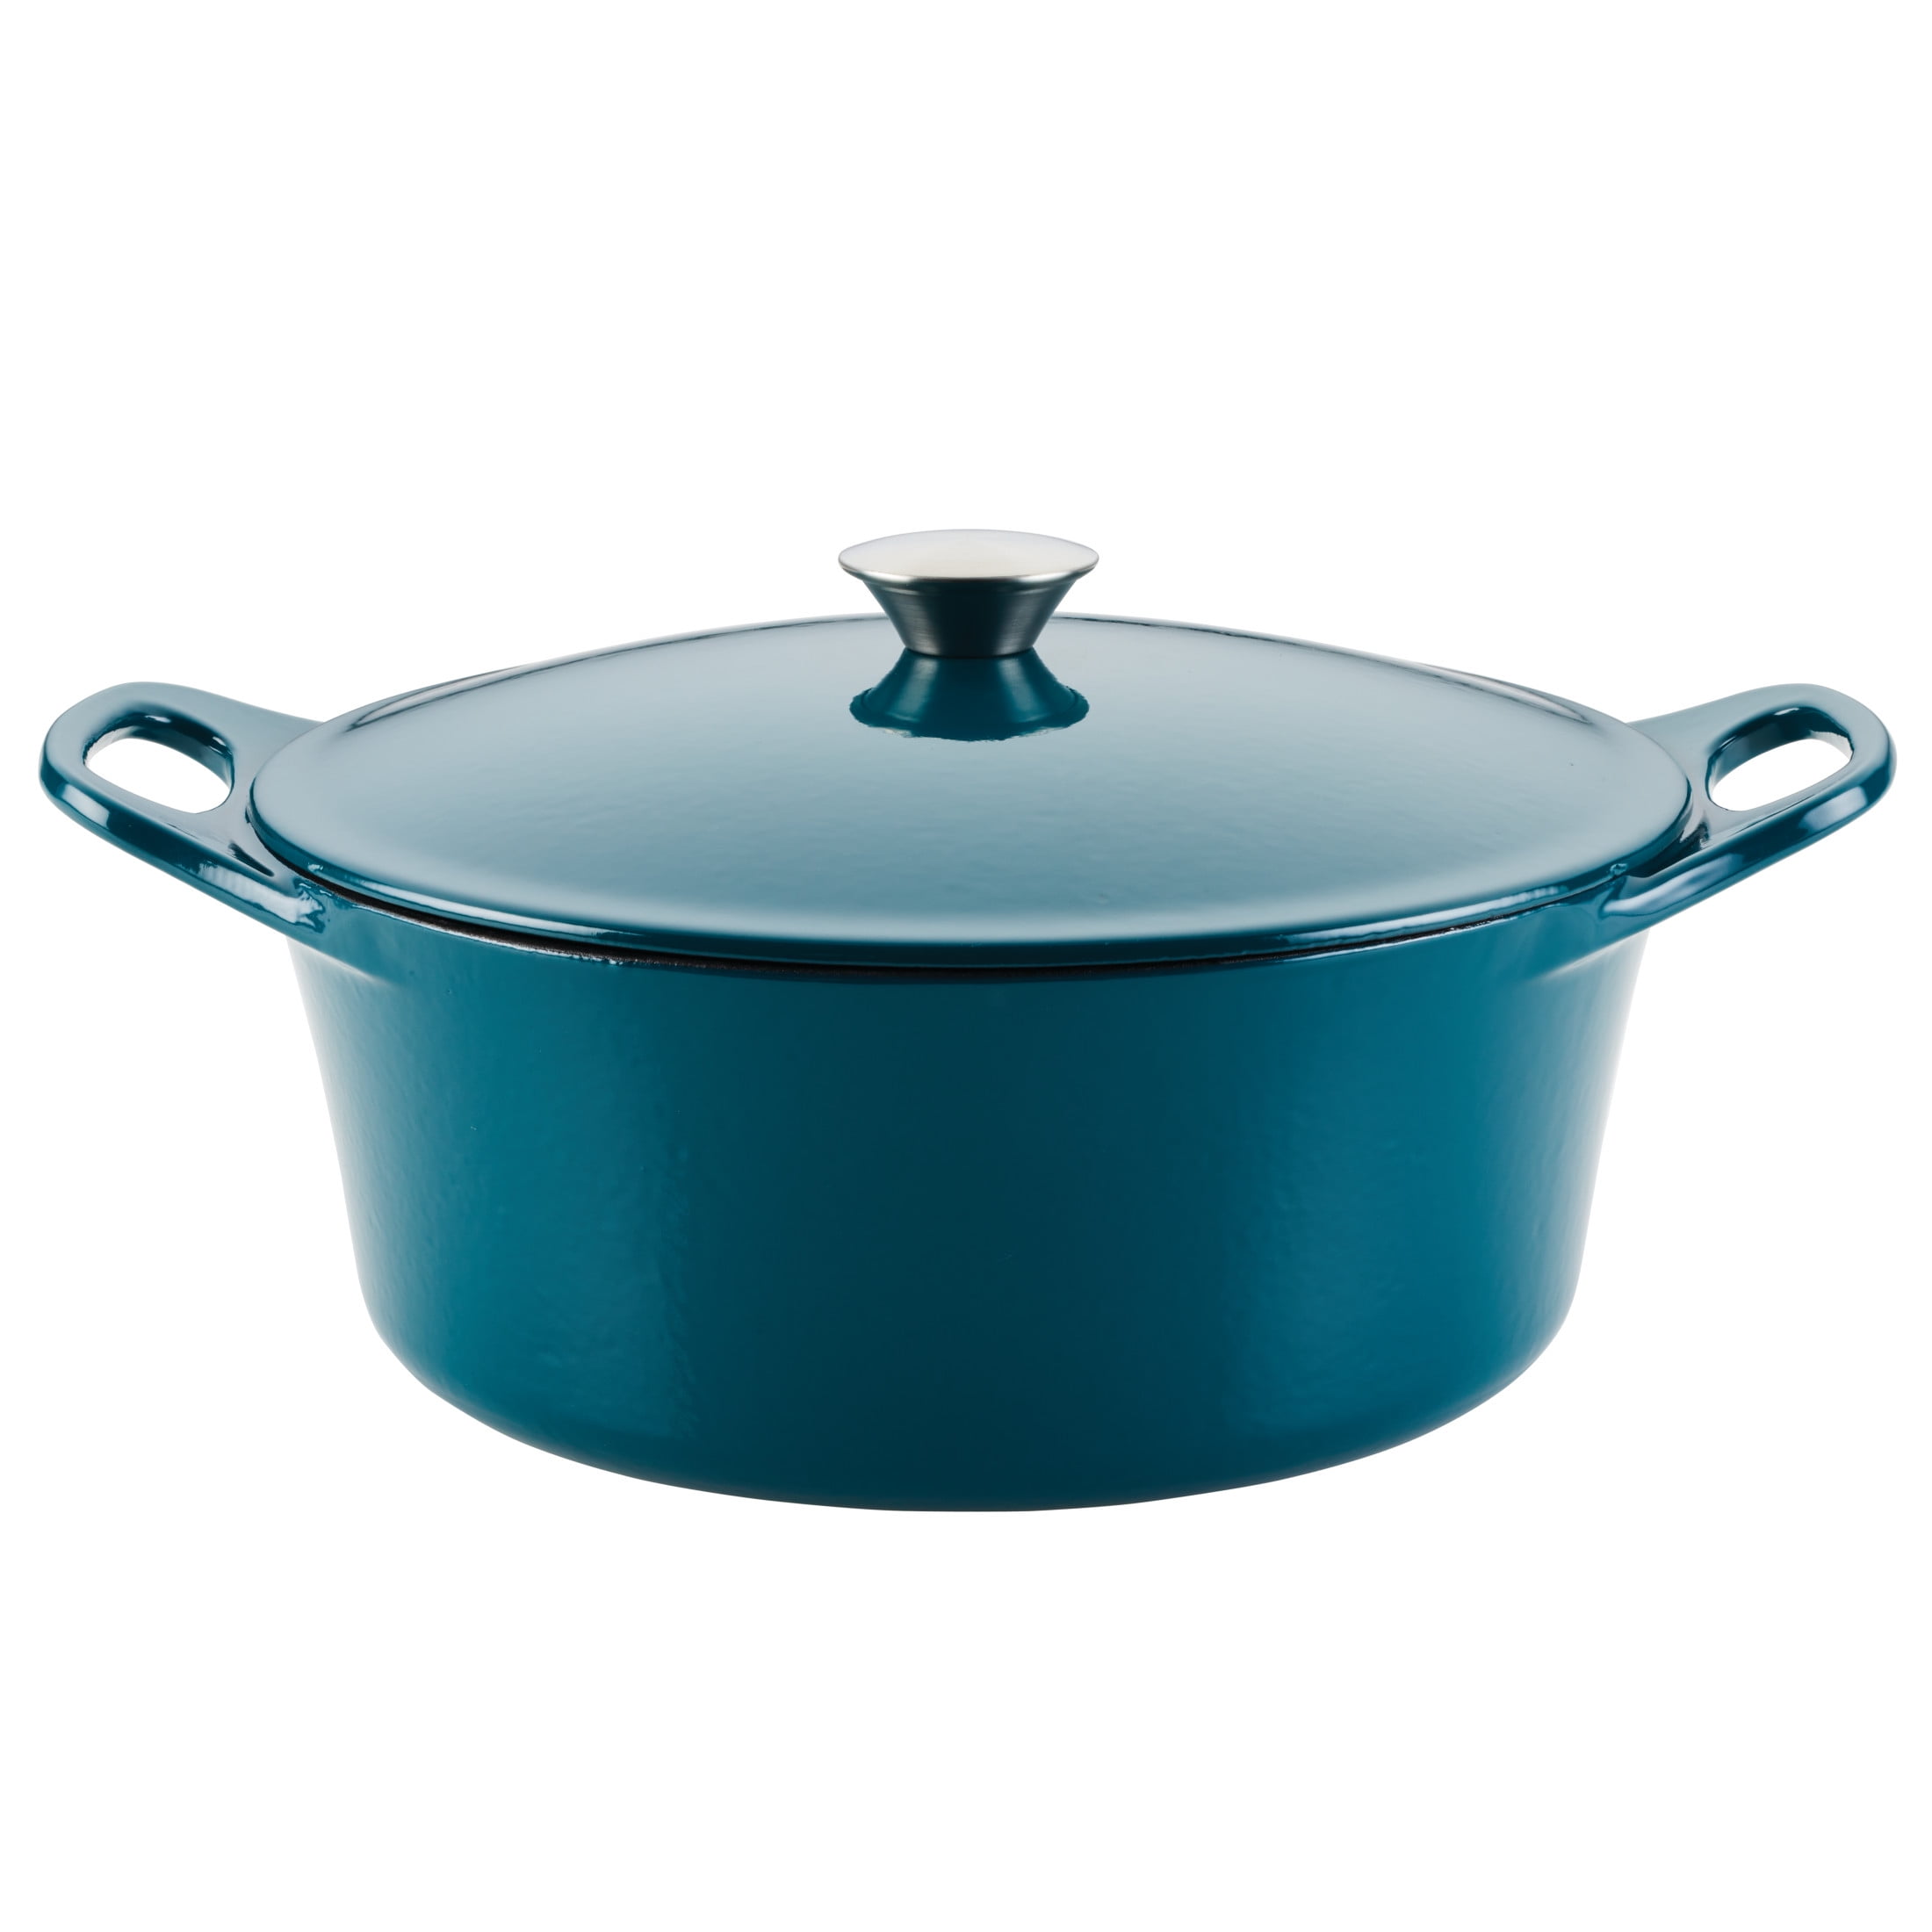 5.5 Quart Enameled Cast Iron Dutch Oven, Cookware 12.81 x 12.00 x 7.80  Inches